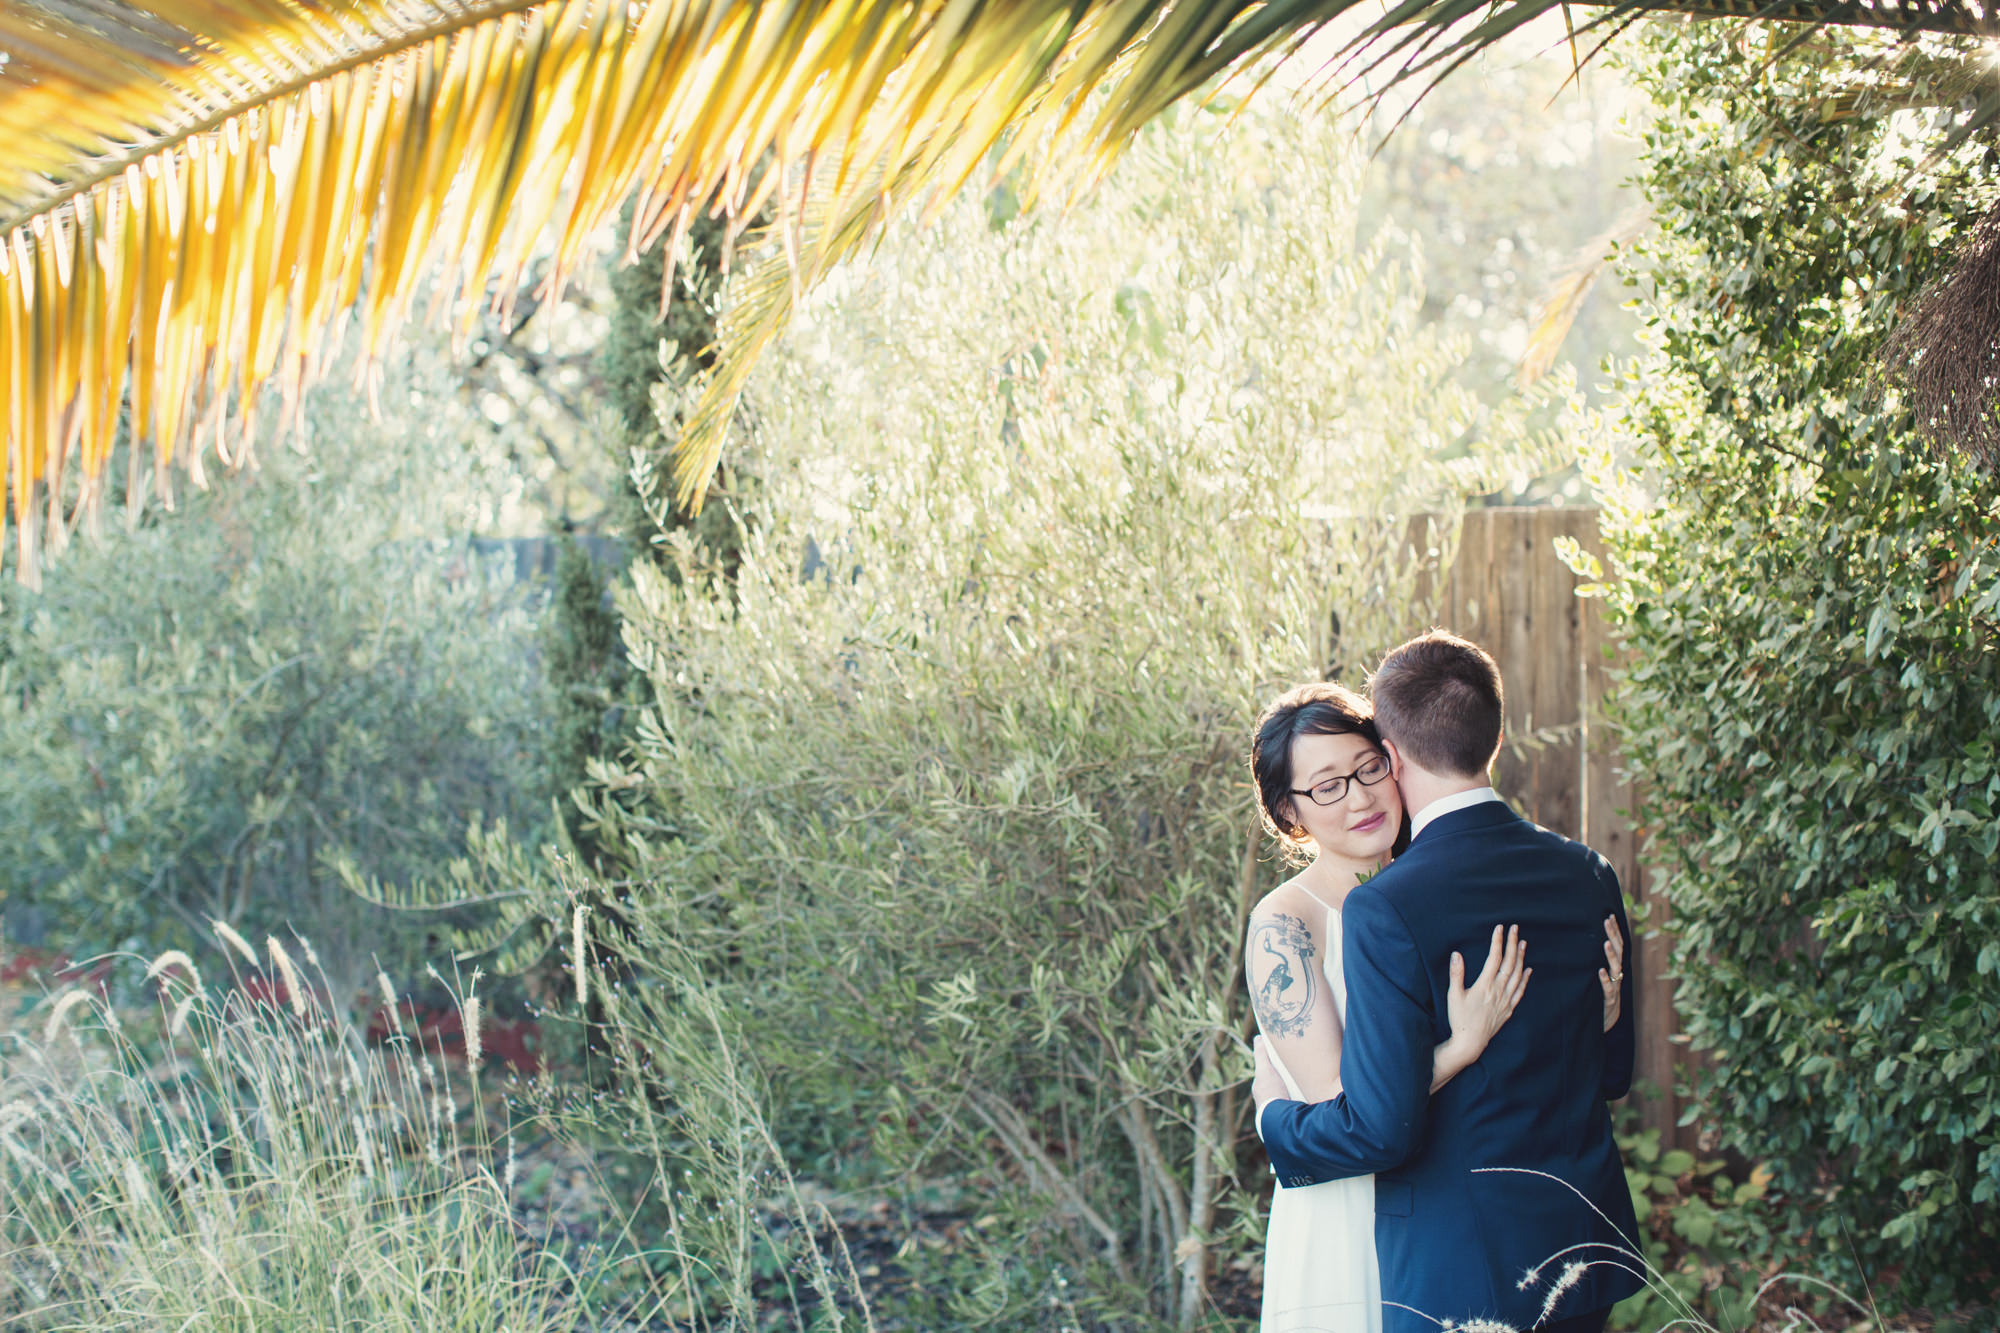 Private Residence Wedding in California ©Anne-Claire Brun 0019